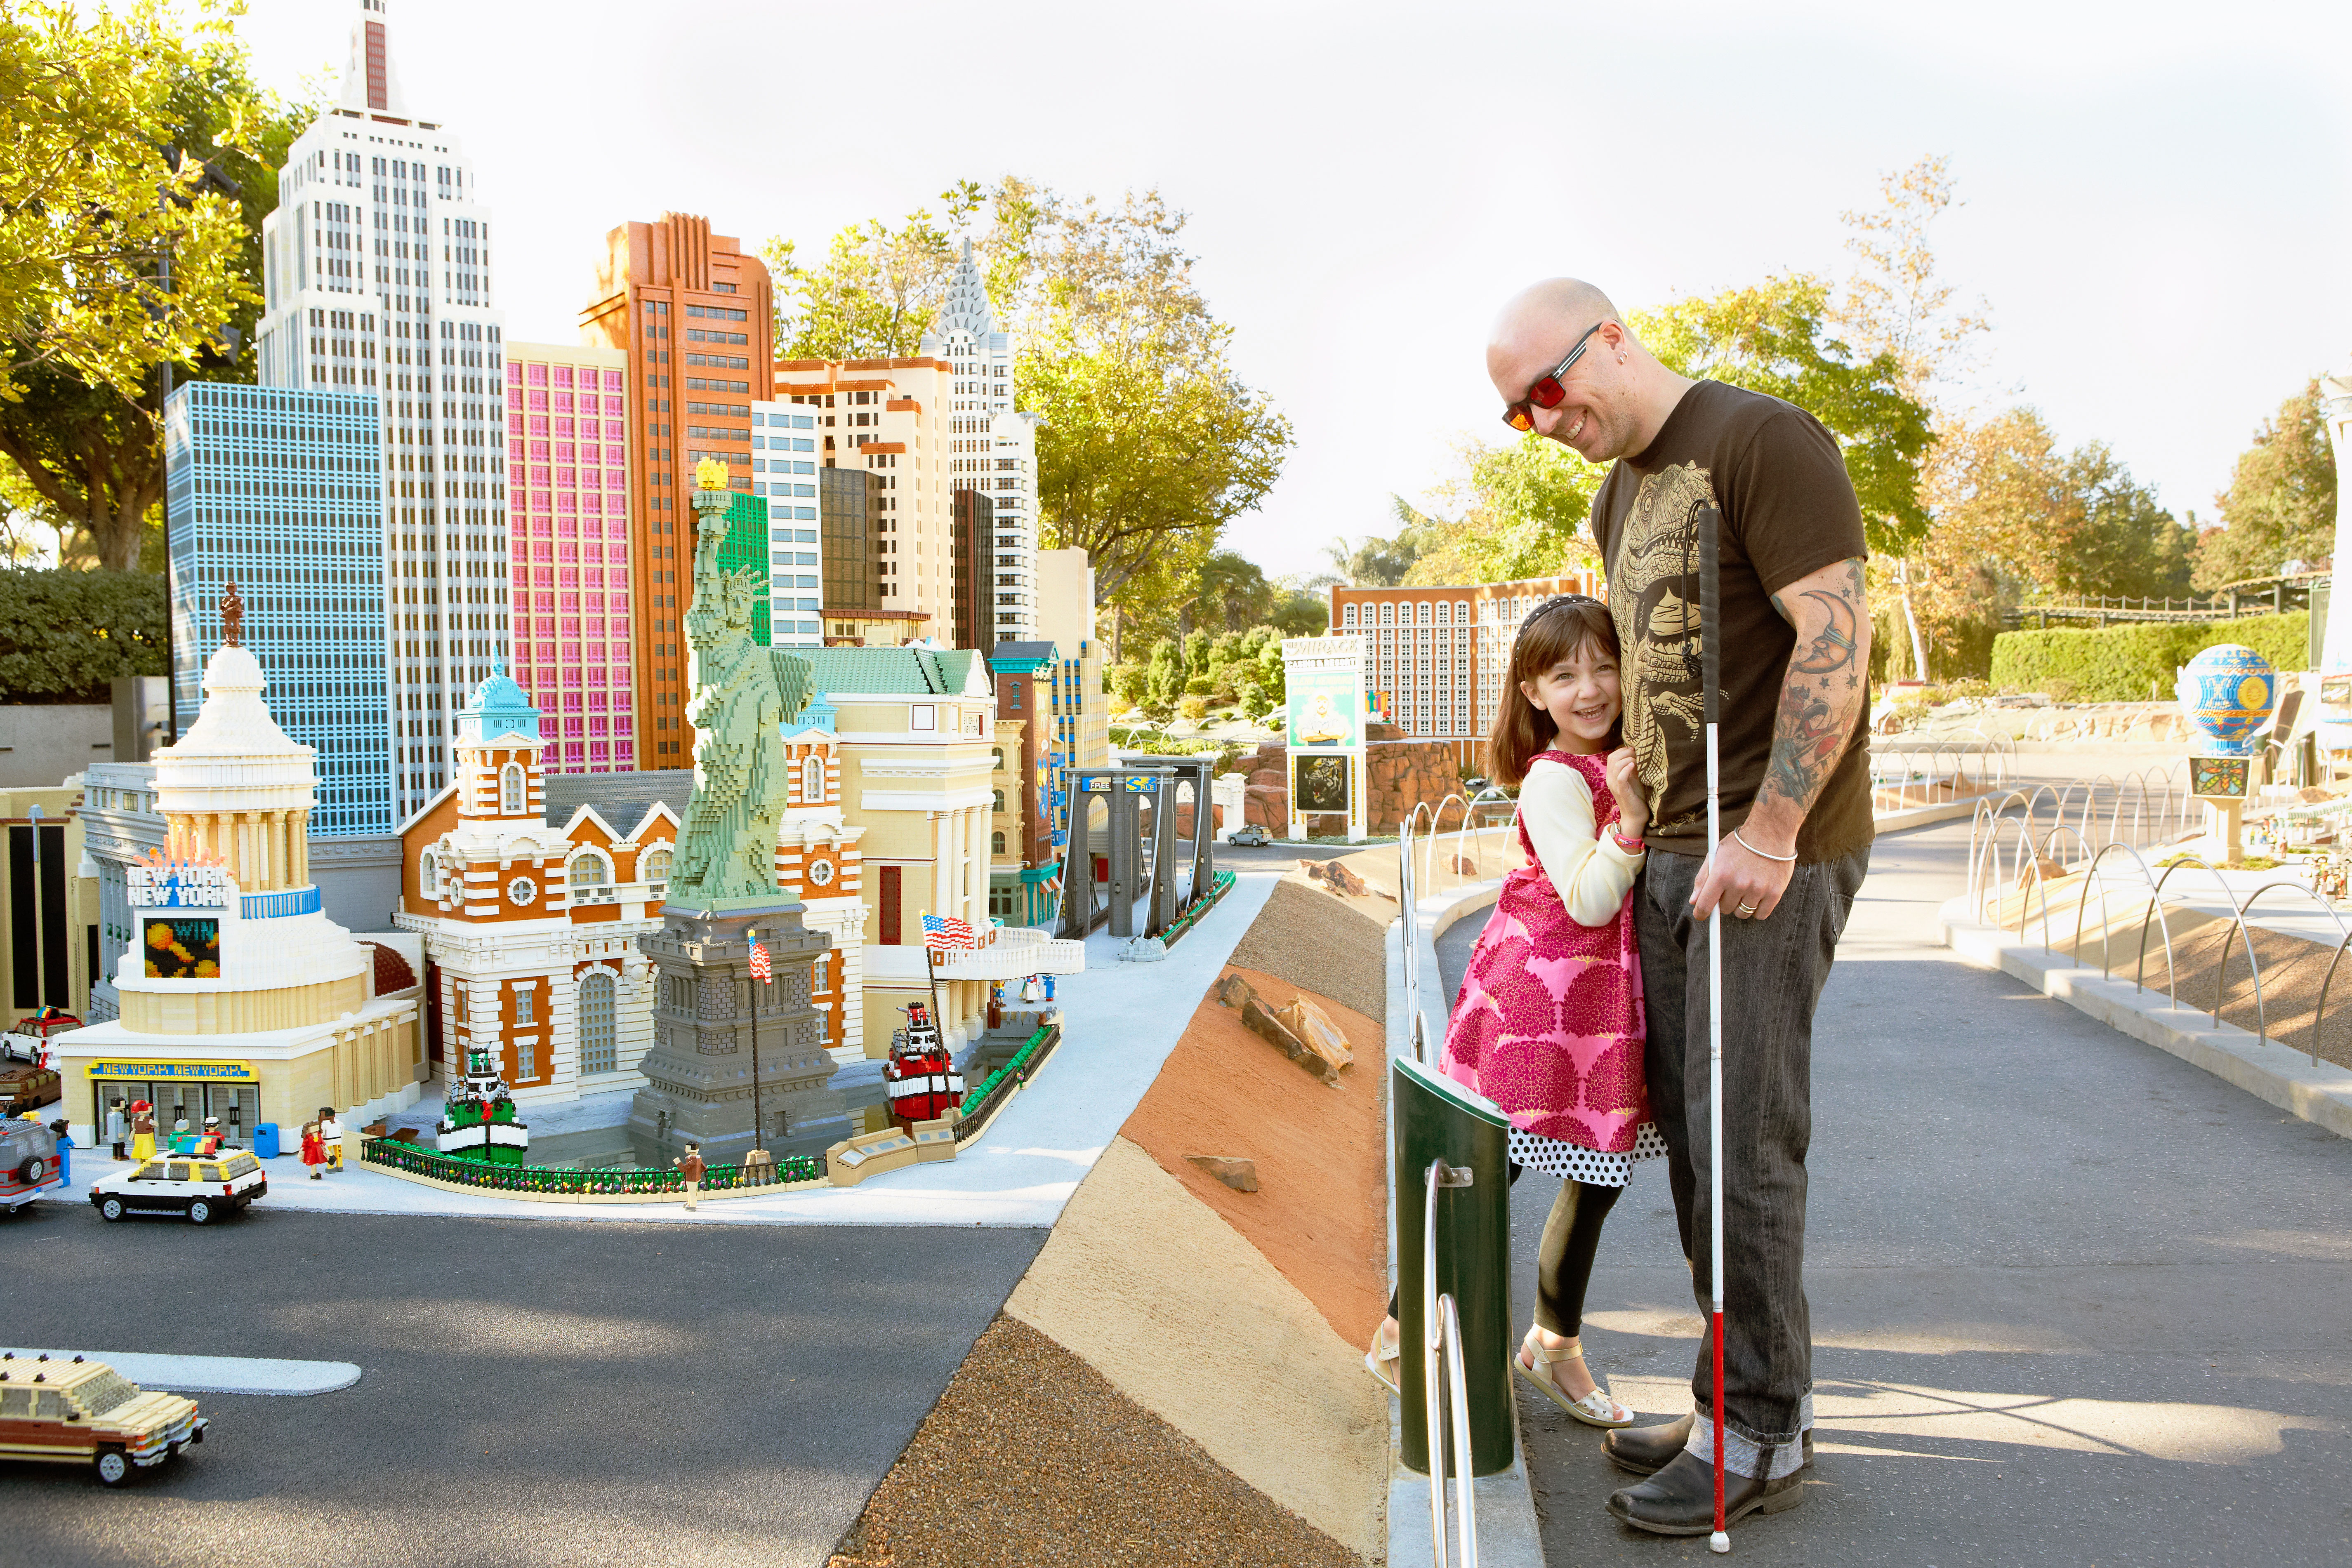 Show and Tell in Legoland California